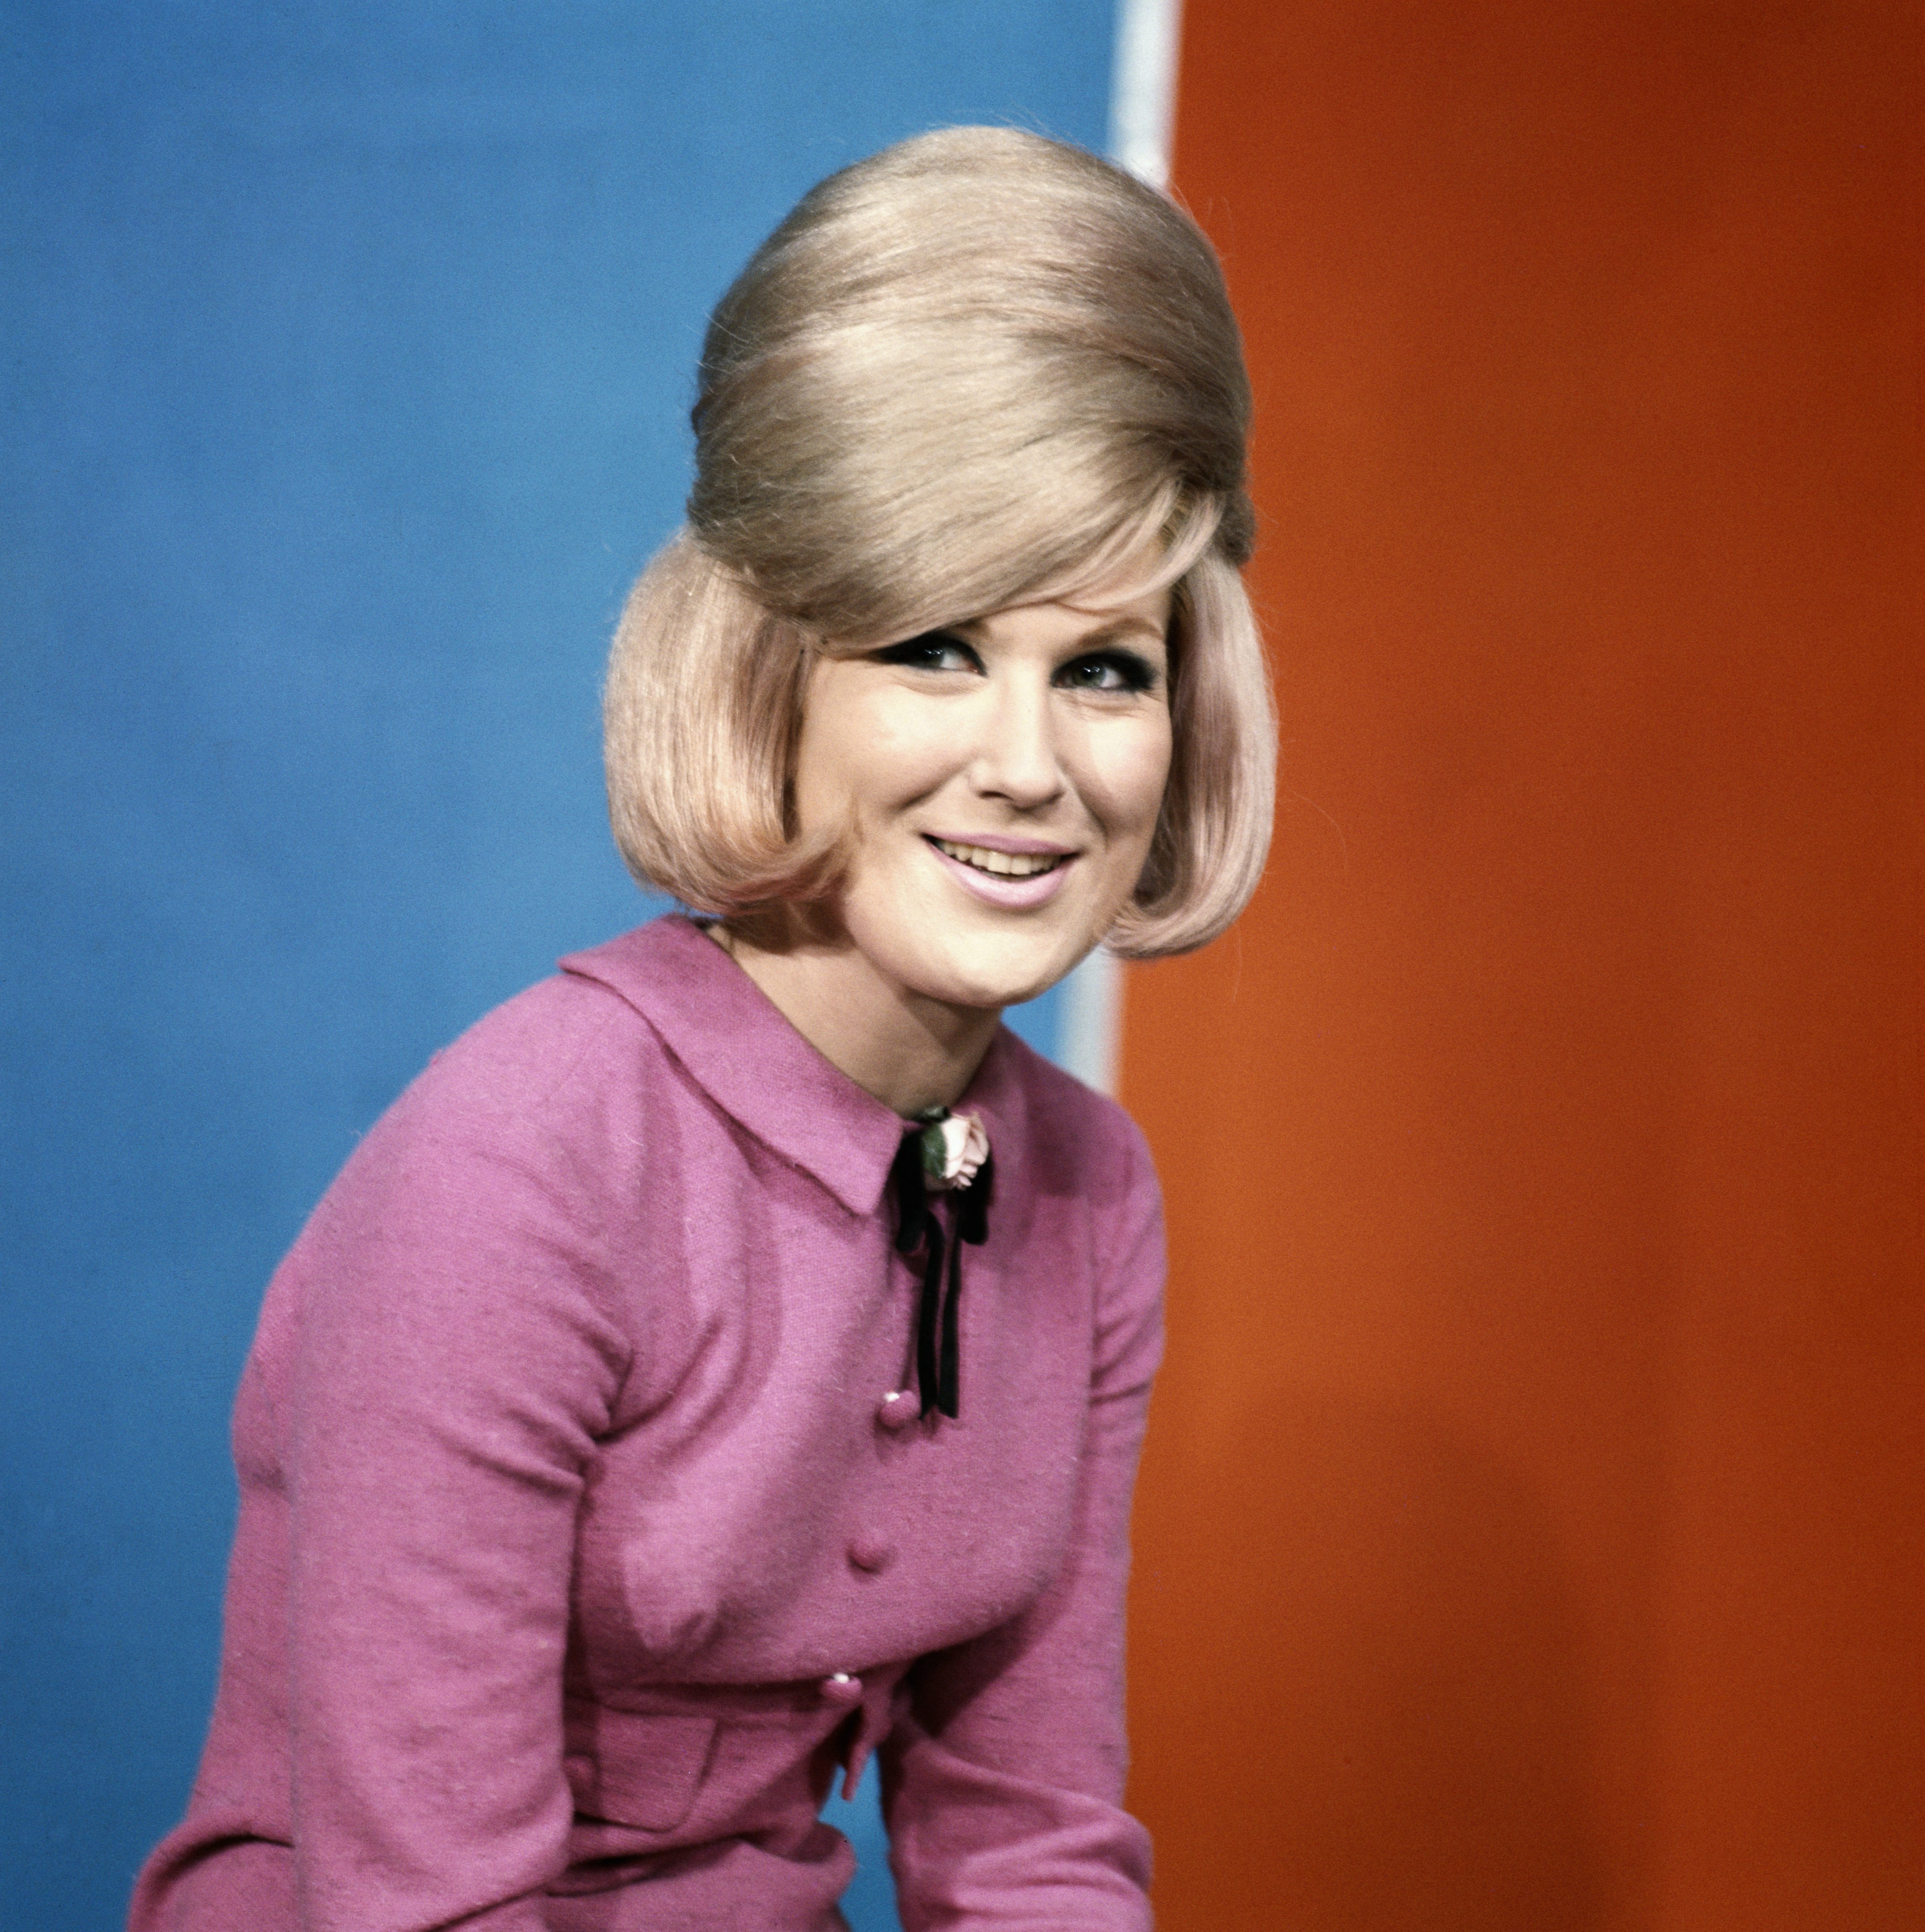 Dusty Springfield on the set of the TV show "Thank Your Lucky Stars" circa 1966 in Birmingham, England. | Source: Getty Images